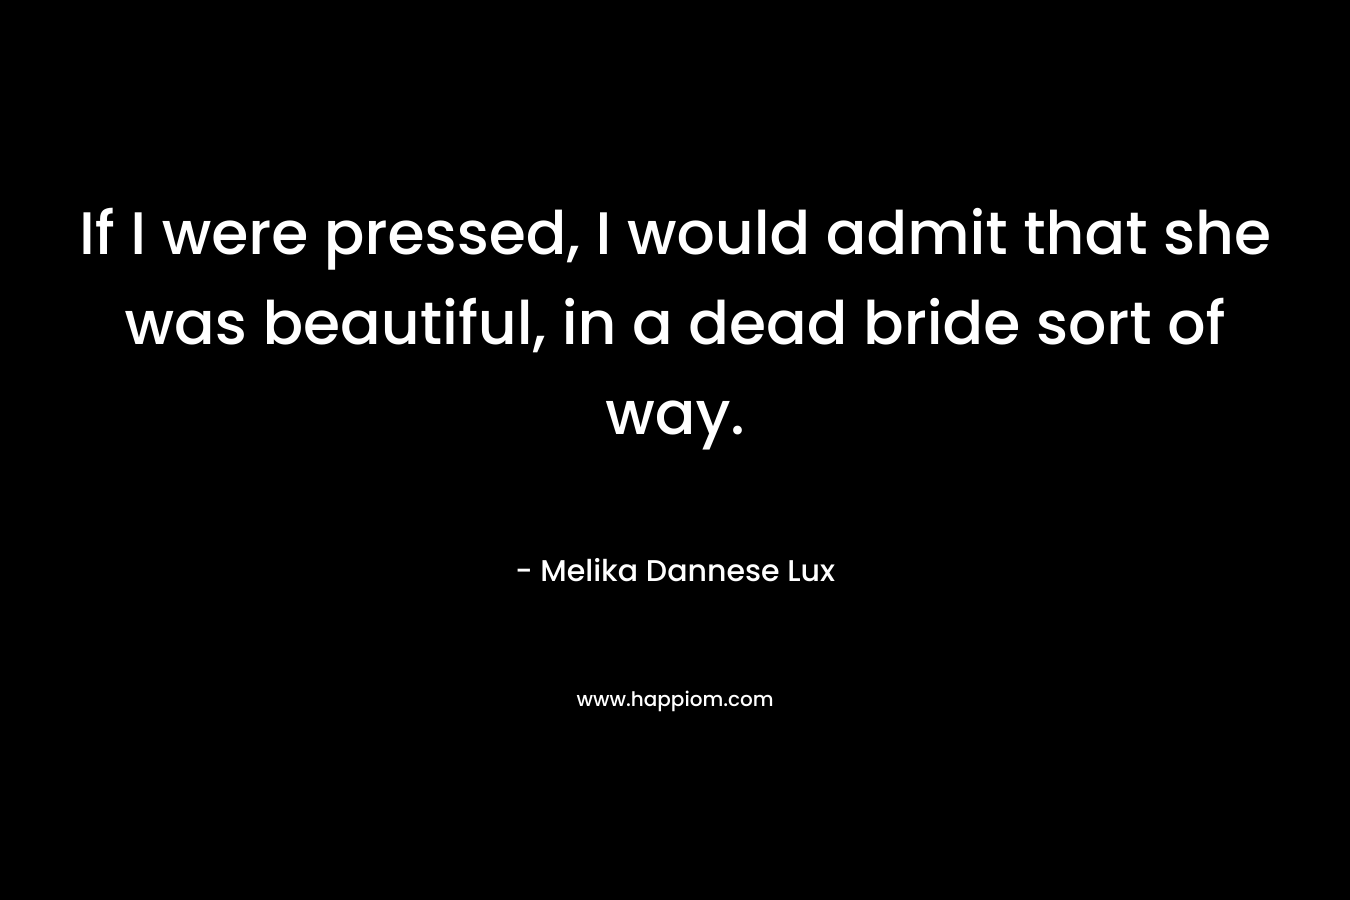 If I were pressed, I would admit that she was beautiful, in a dead bride sort of way. – Melika Dannese Lux